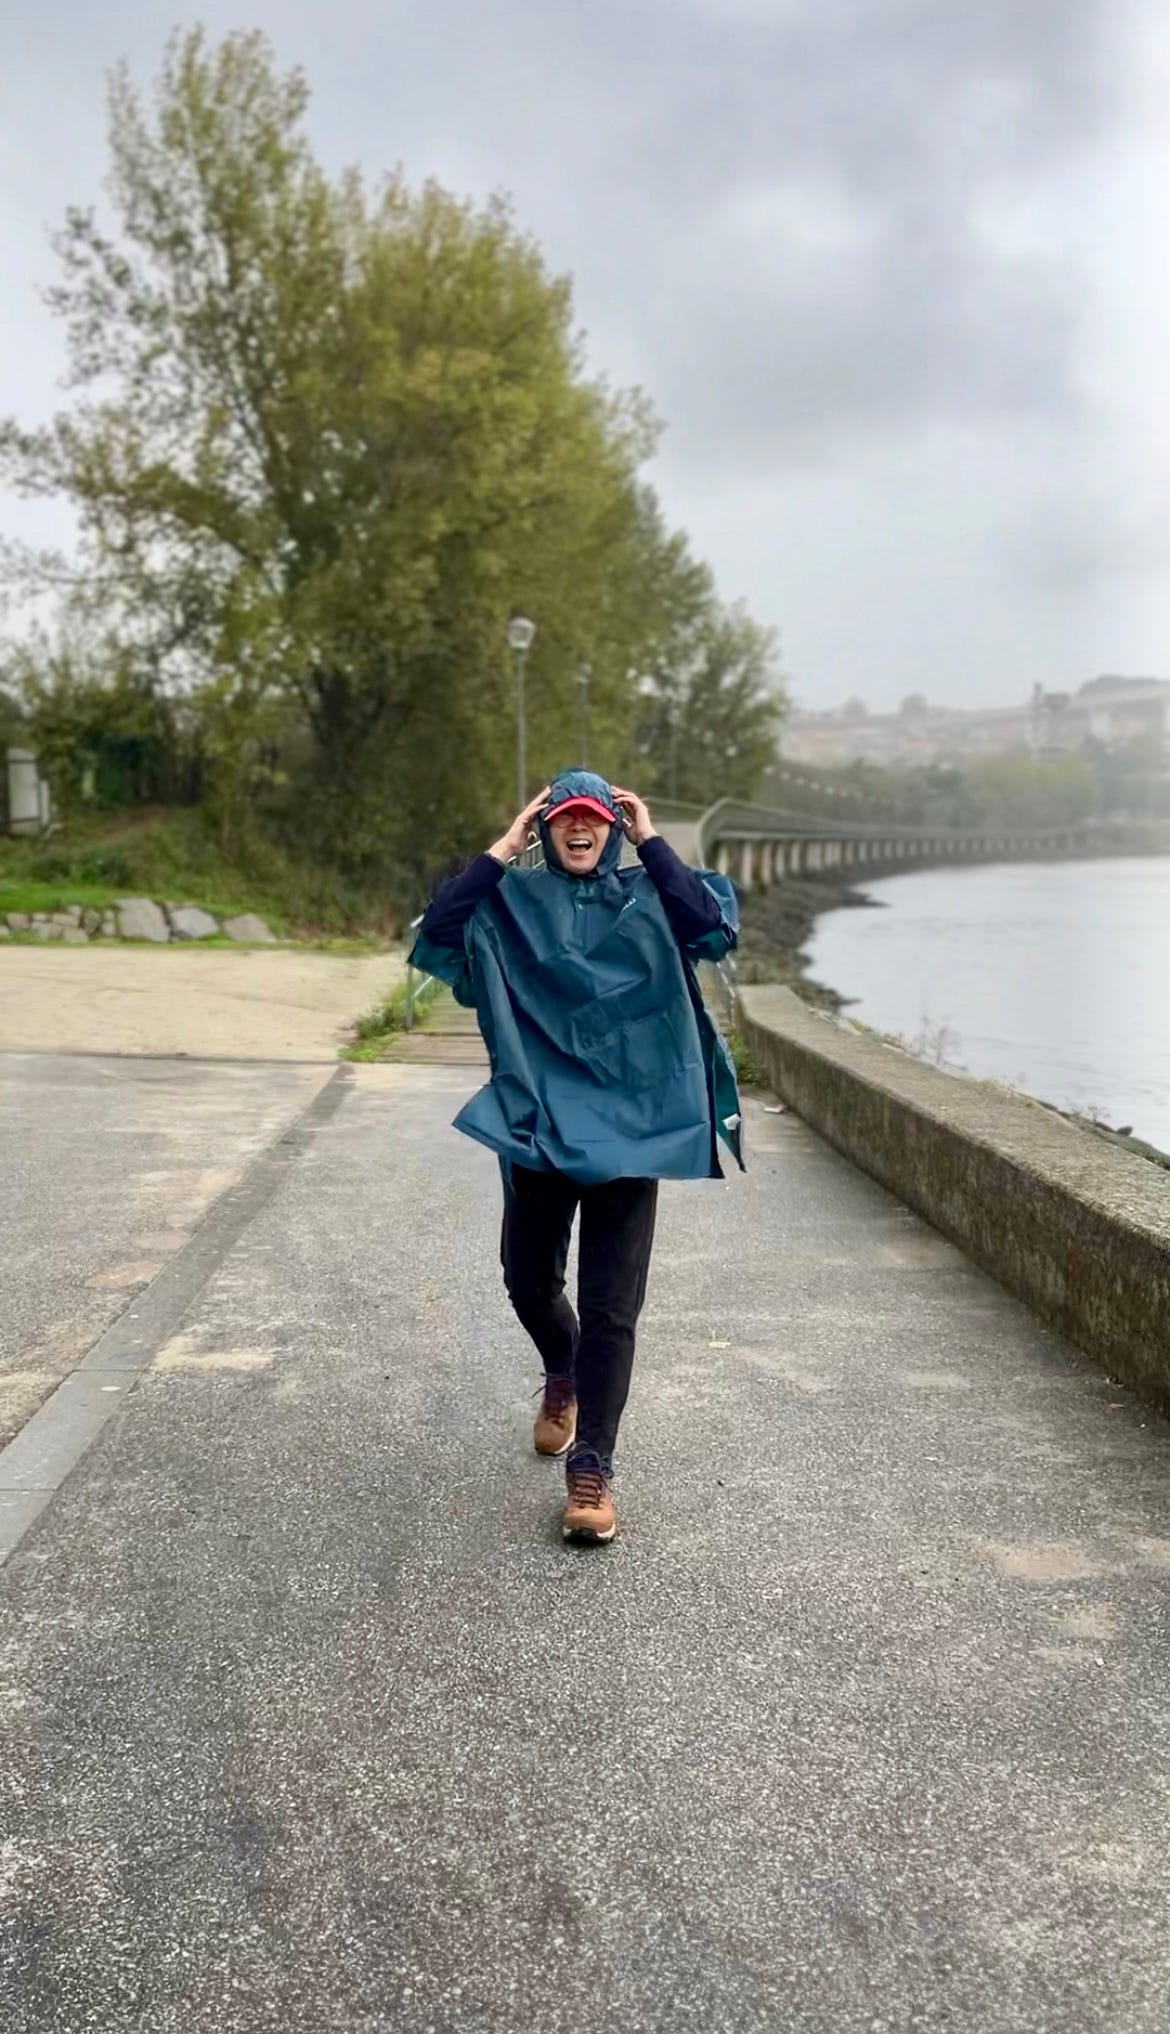 image: photo of me laughing, wearing a rain poncho